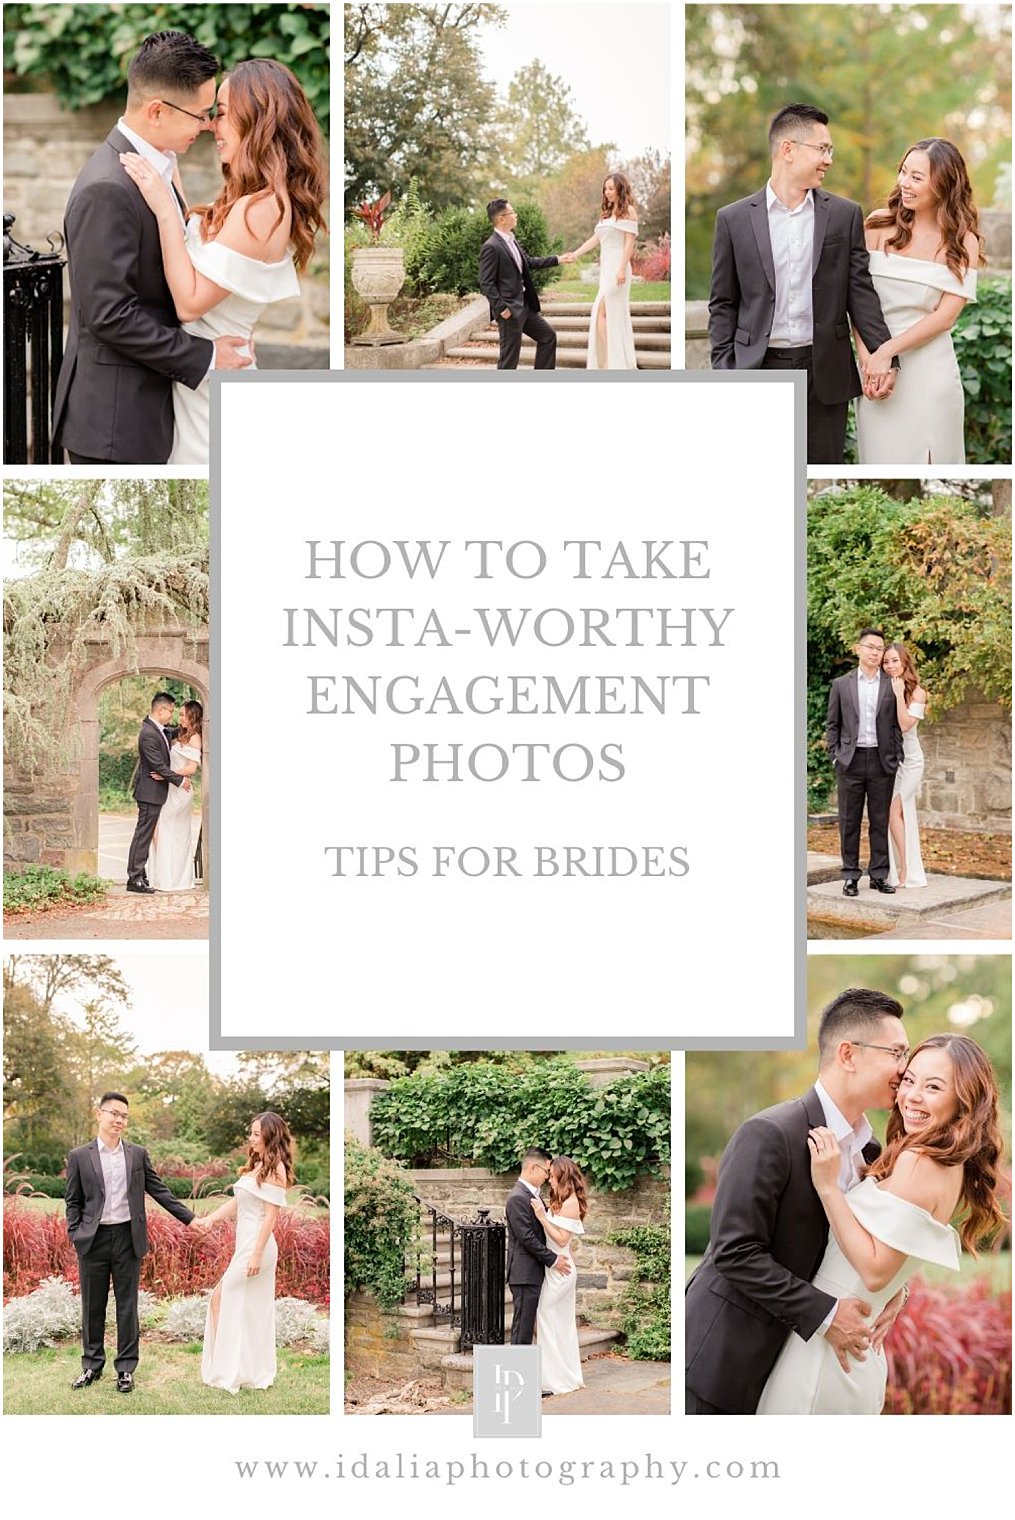 How to take Insta-Worthy engagement photos